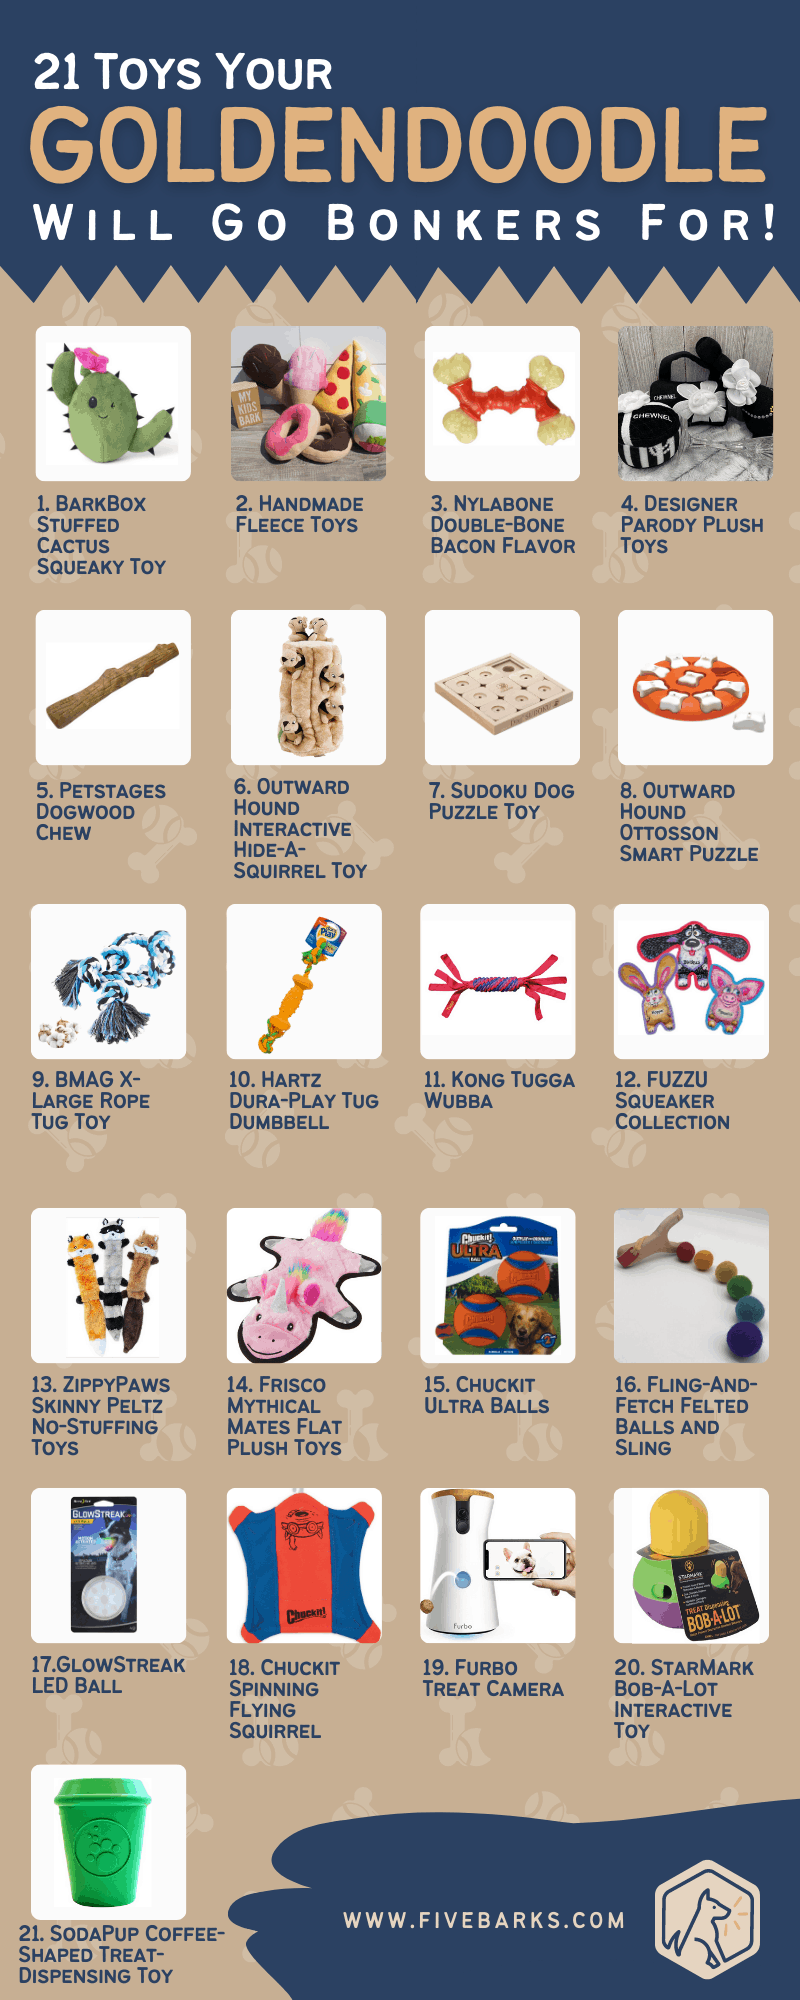 21 Toys Your Goldendoodle Will Go Bonkers For! - Infographic